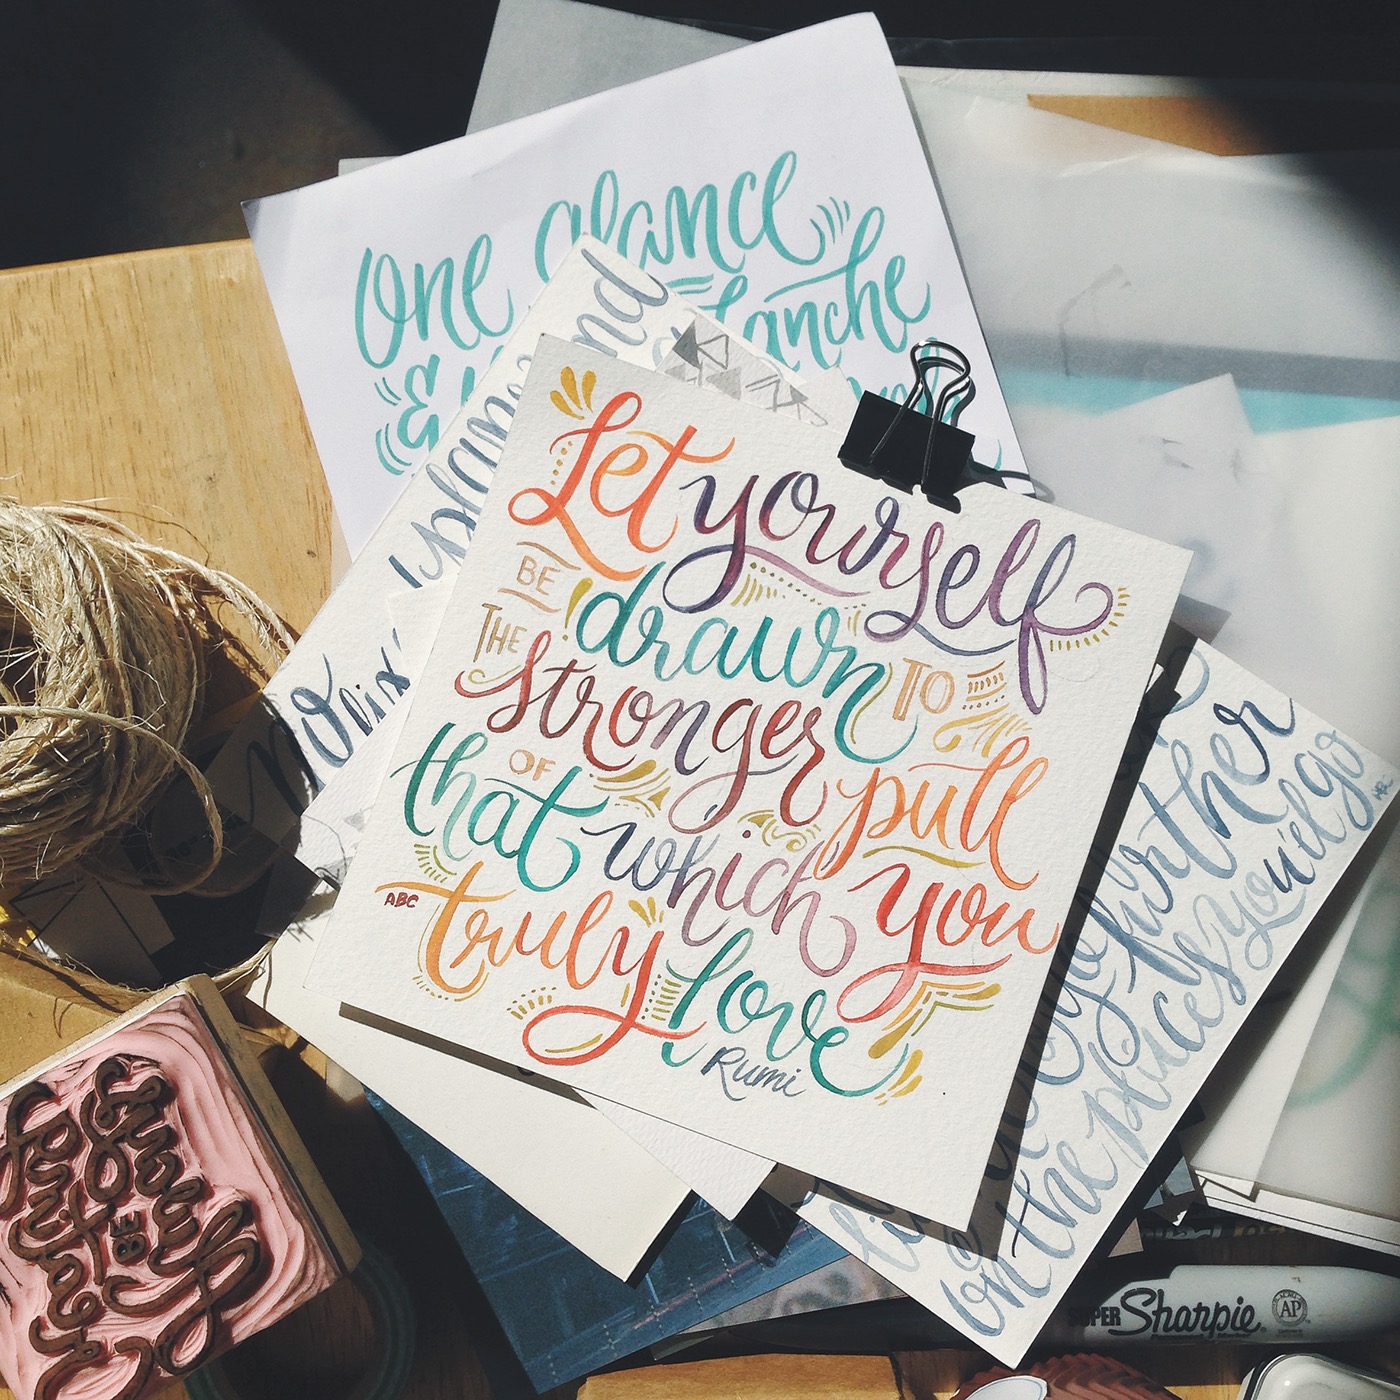 Quotes motivation lettering HAND LETTERING watercolor artwork abbey sy type Good Type hand writing hand written paint brush Create